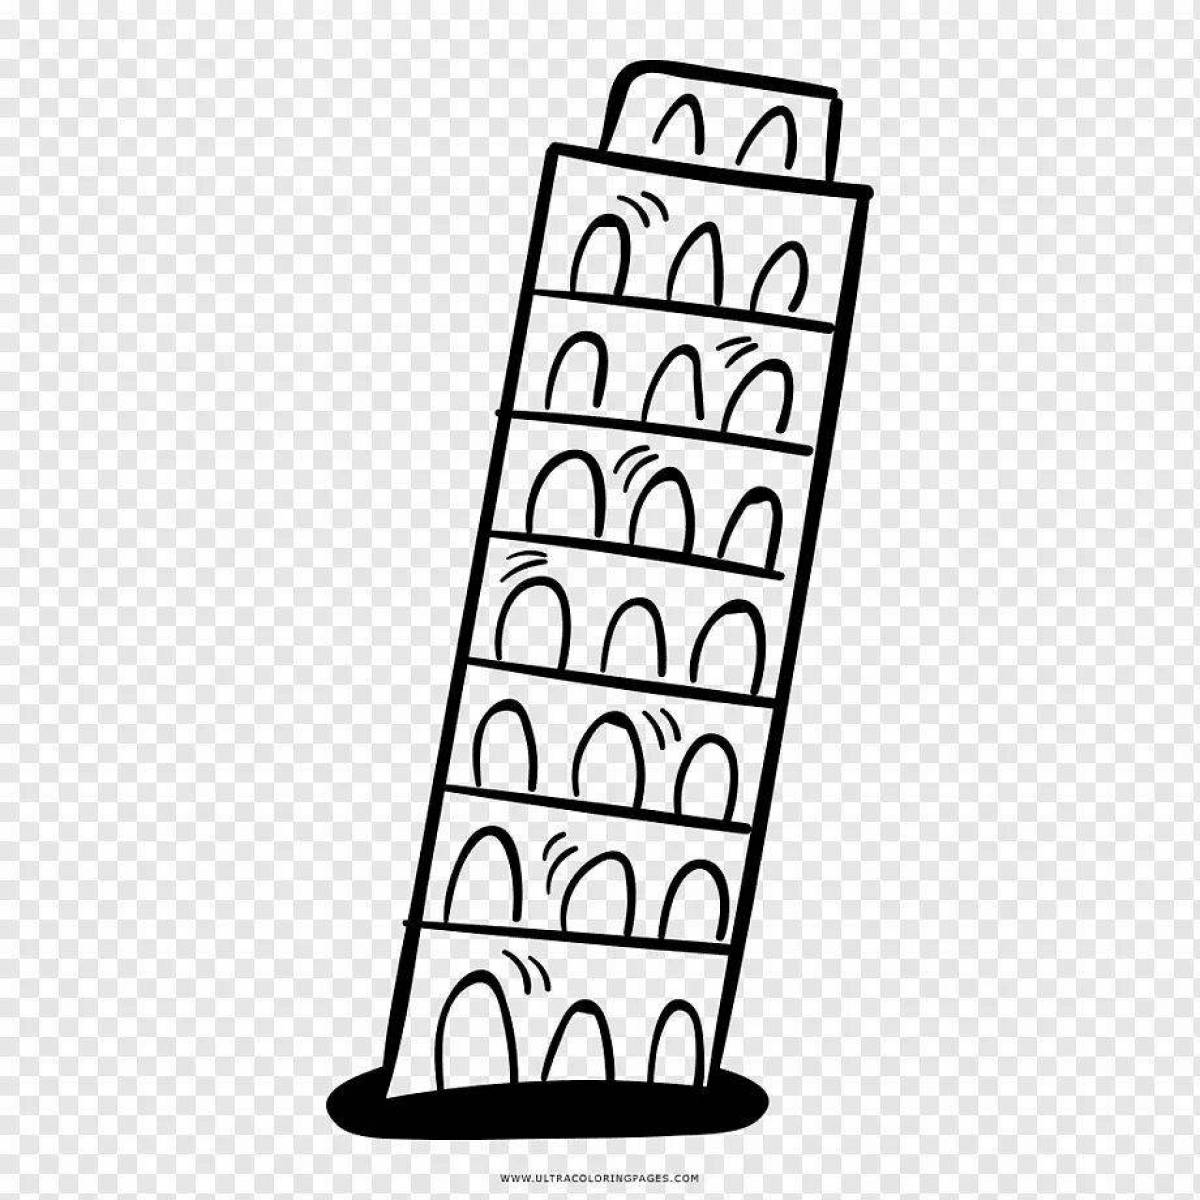 Delightful coloring of the Leaning Tower of Pisa